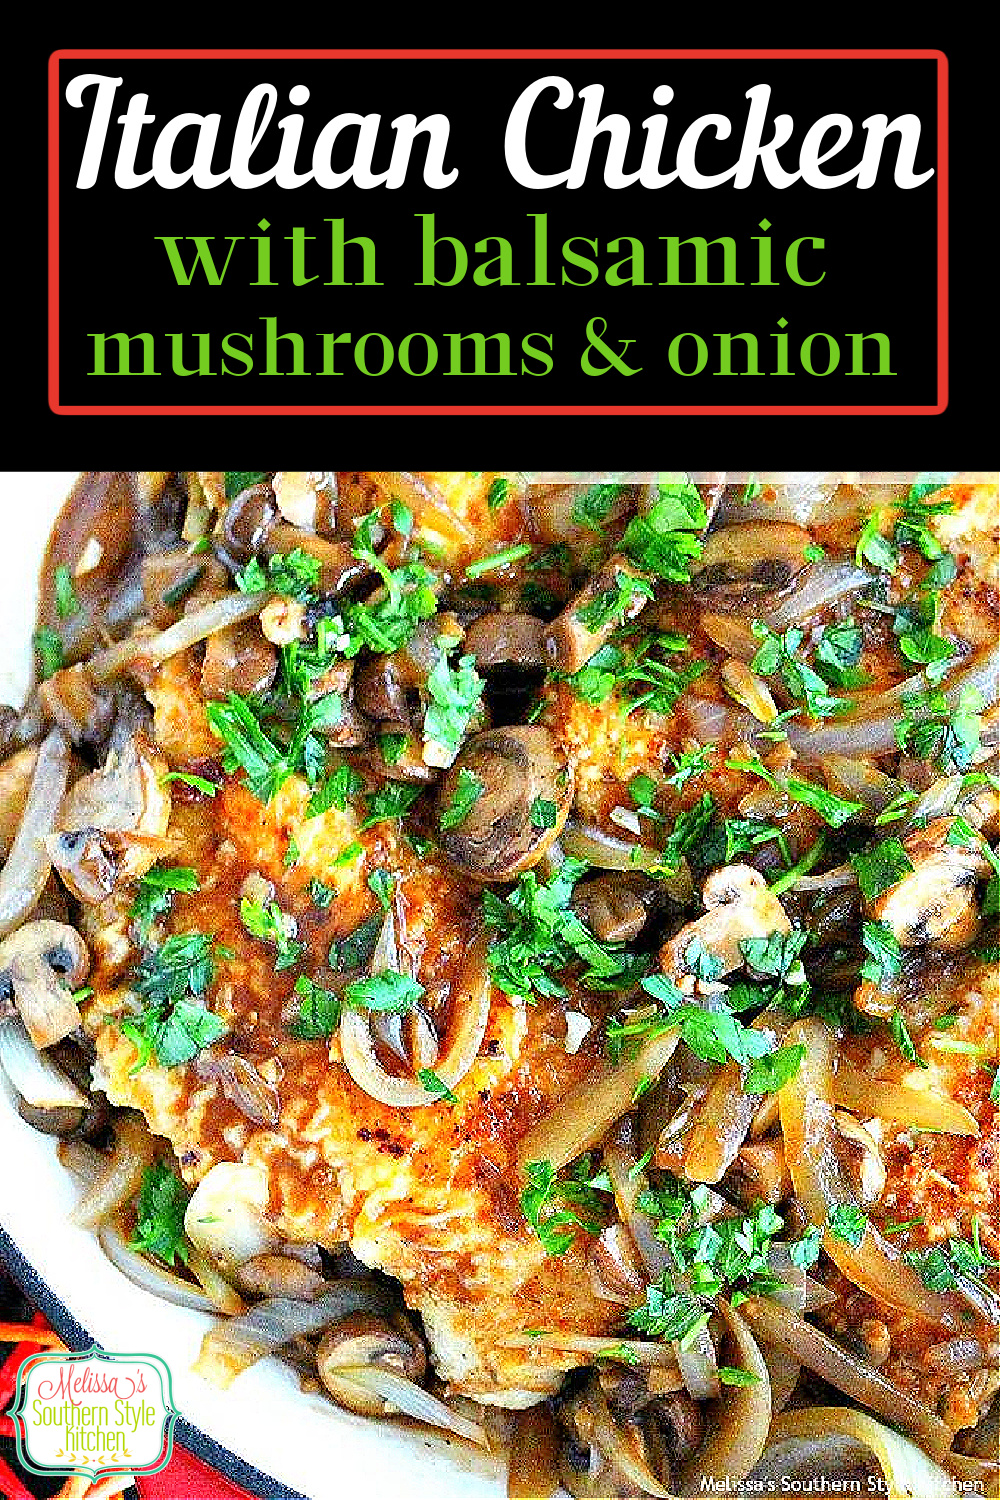 Italian Chicken with Balsamic Mushrooms and Onions is a classy 30 minute meal #chicken #Italian #Italianchicken #lowcarb #chickenrecipes #easyrecipes #balsamic #mushrooms #dinnerideas #dinner #food #recipes #maindish #friedchicken #southernrecipes #southernfood #melissassouthernstylekitchen via @melissasssk